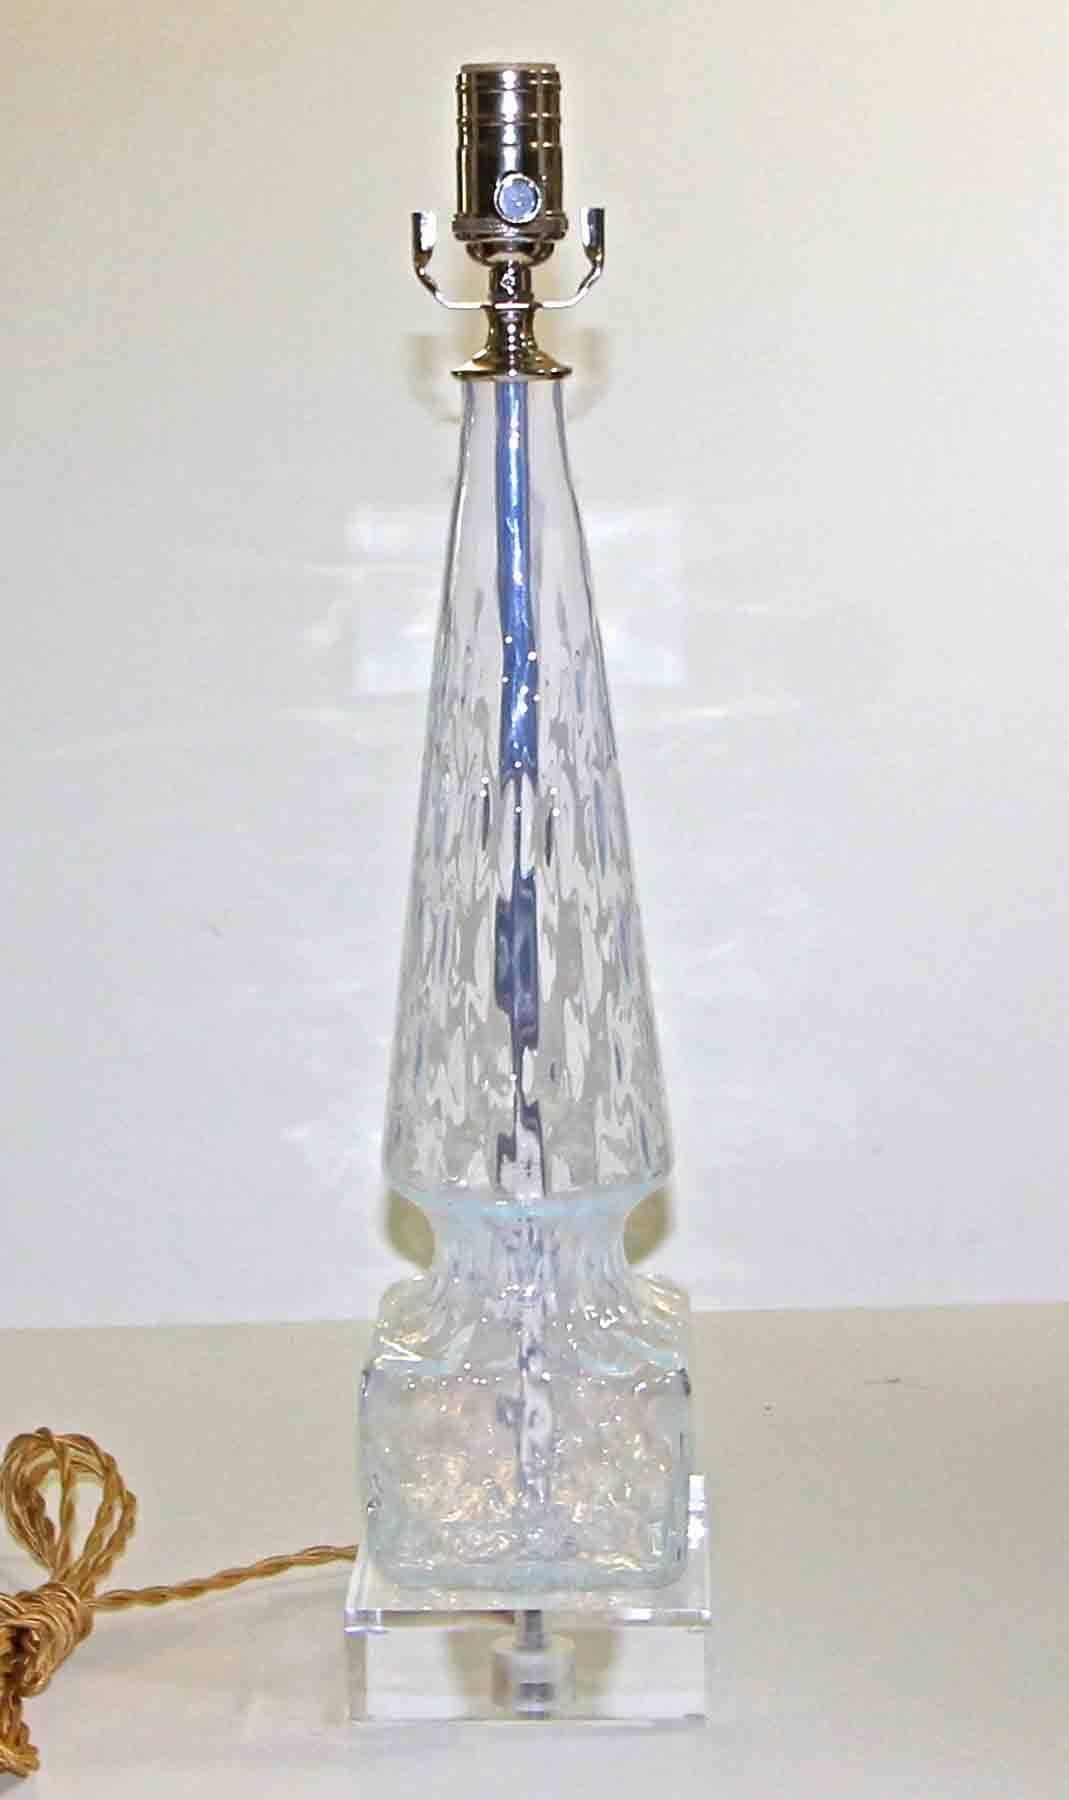 Murano handblown opalescent glass lamp in obelisk form with diamond pattern to glass. Newly wired for US on custom acrylic base with French style rayon covered twisted cord and nickel plated fittings.

Height to top of glass is 17.5